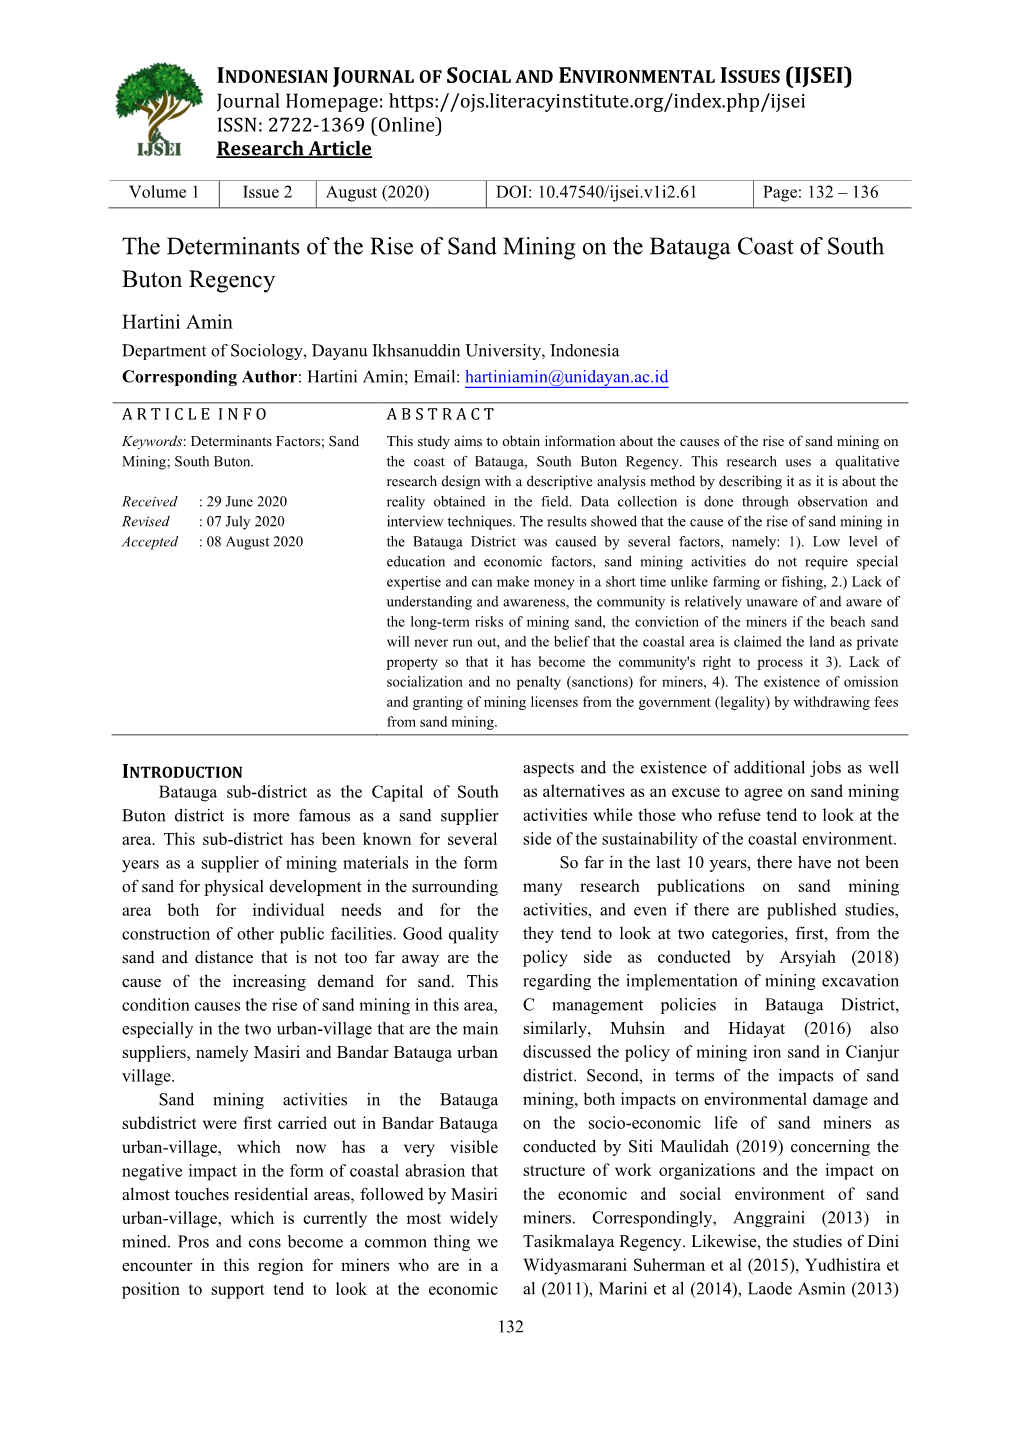 The Determinants of the Rise of Sand Mining on the Batauga Coast Of